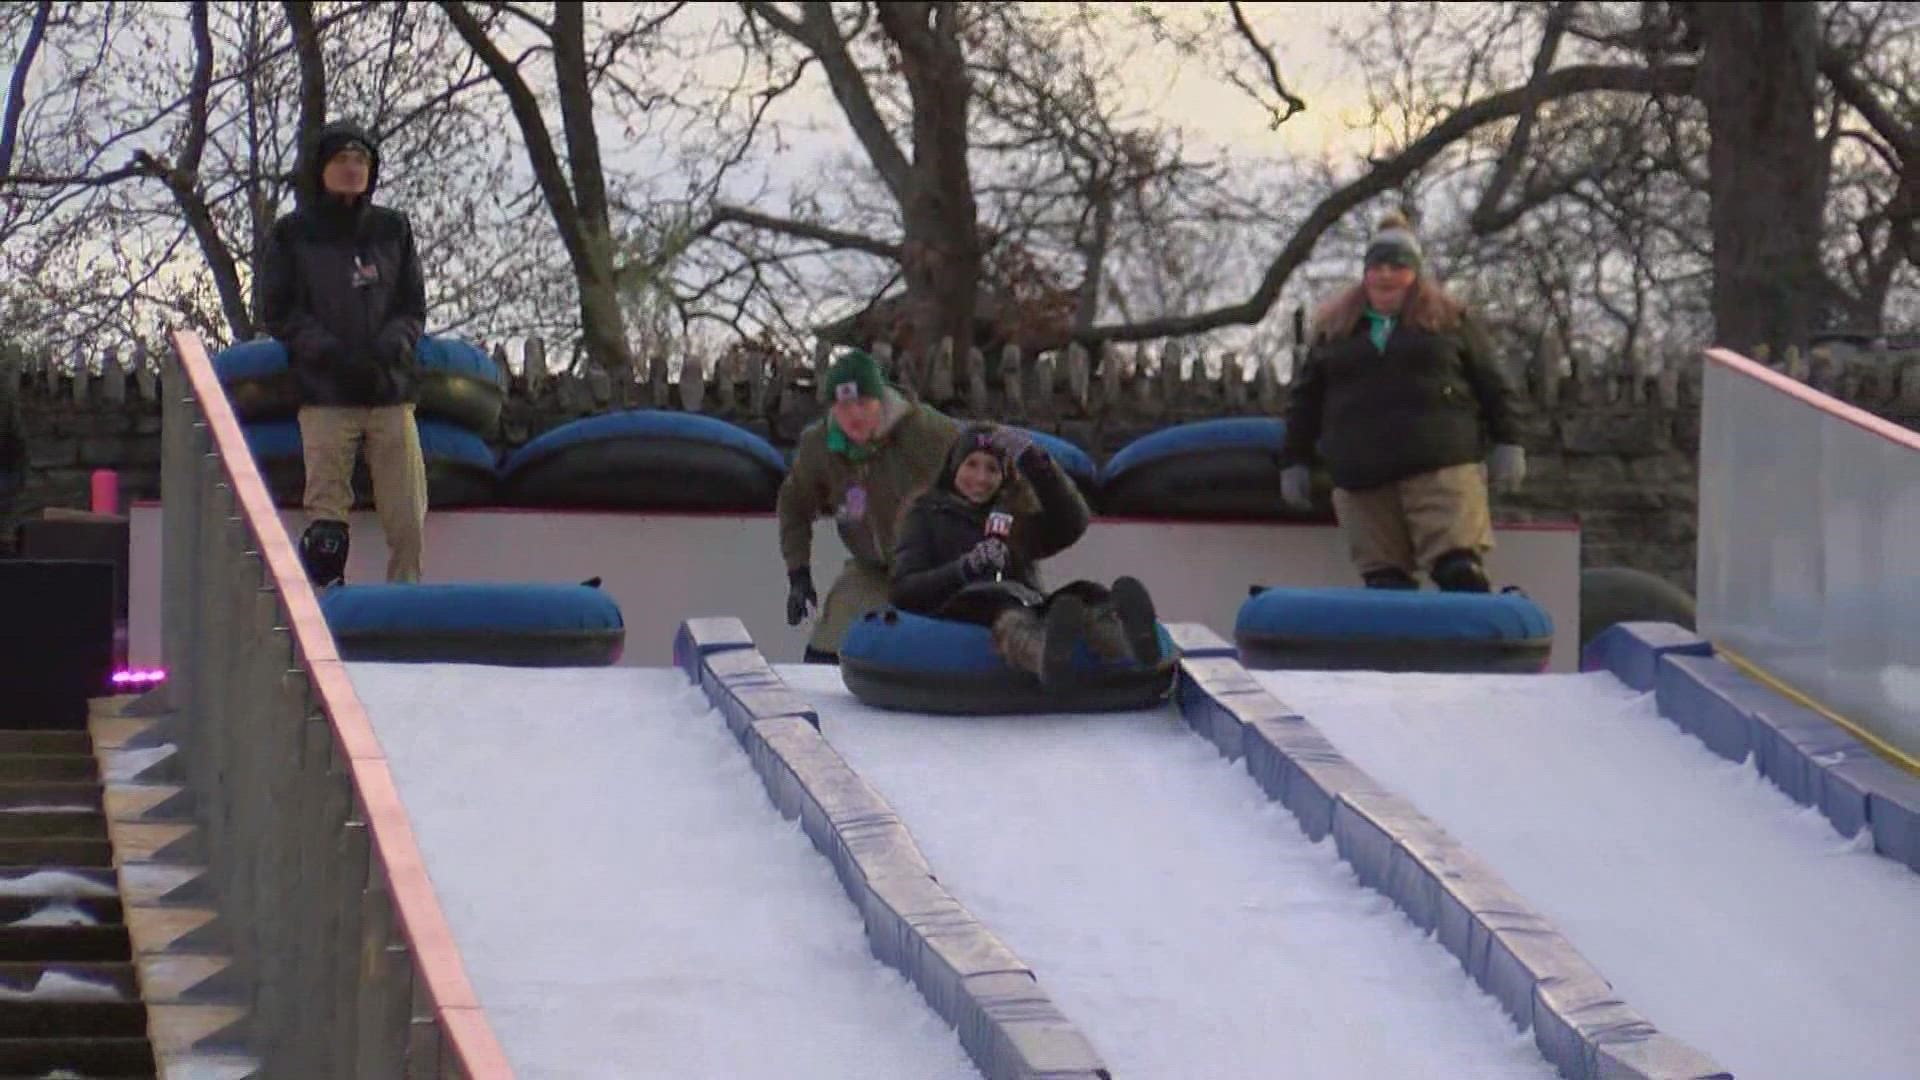 WTOL 11's Kalie Marantette tried out the ice slide at the Lights Before Christmas at the Toledo Zoo.